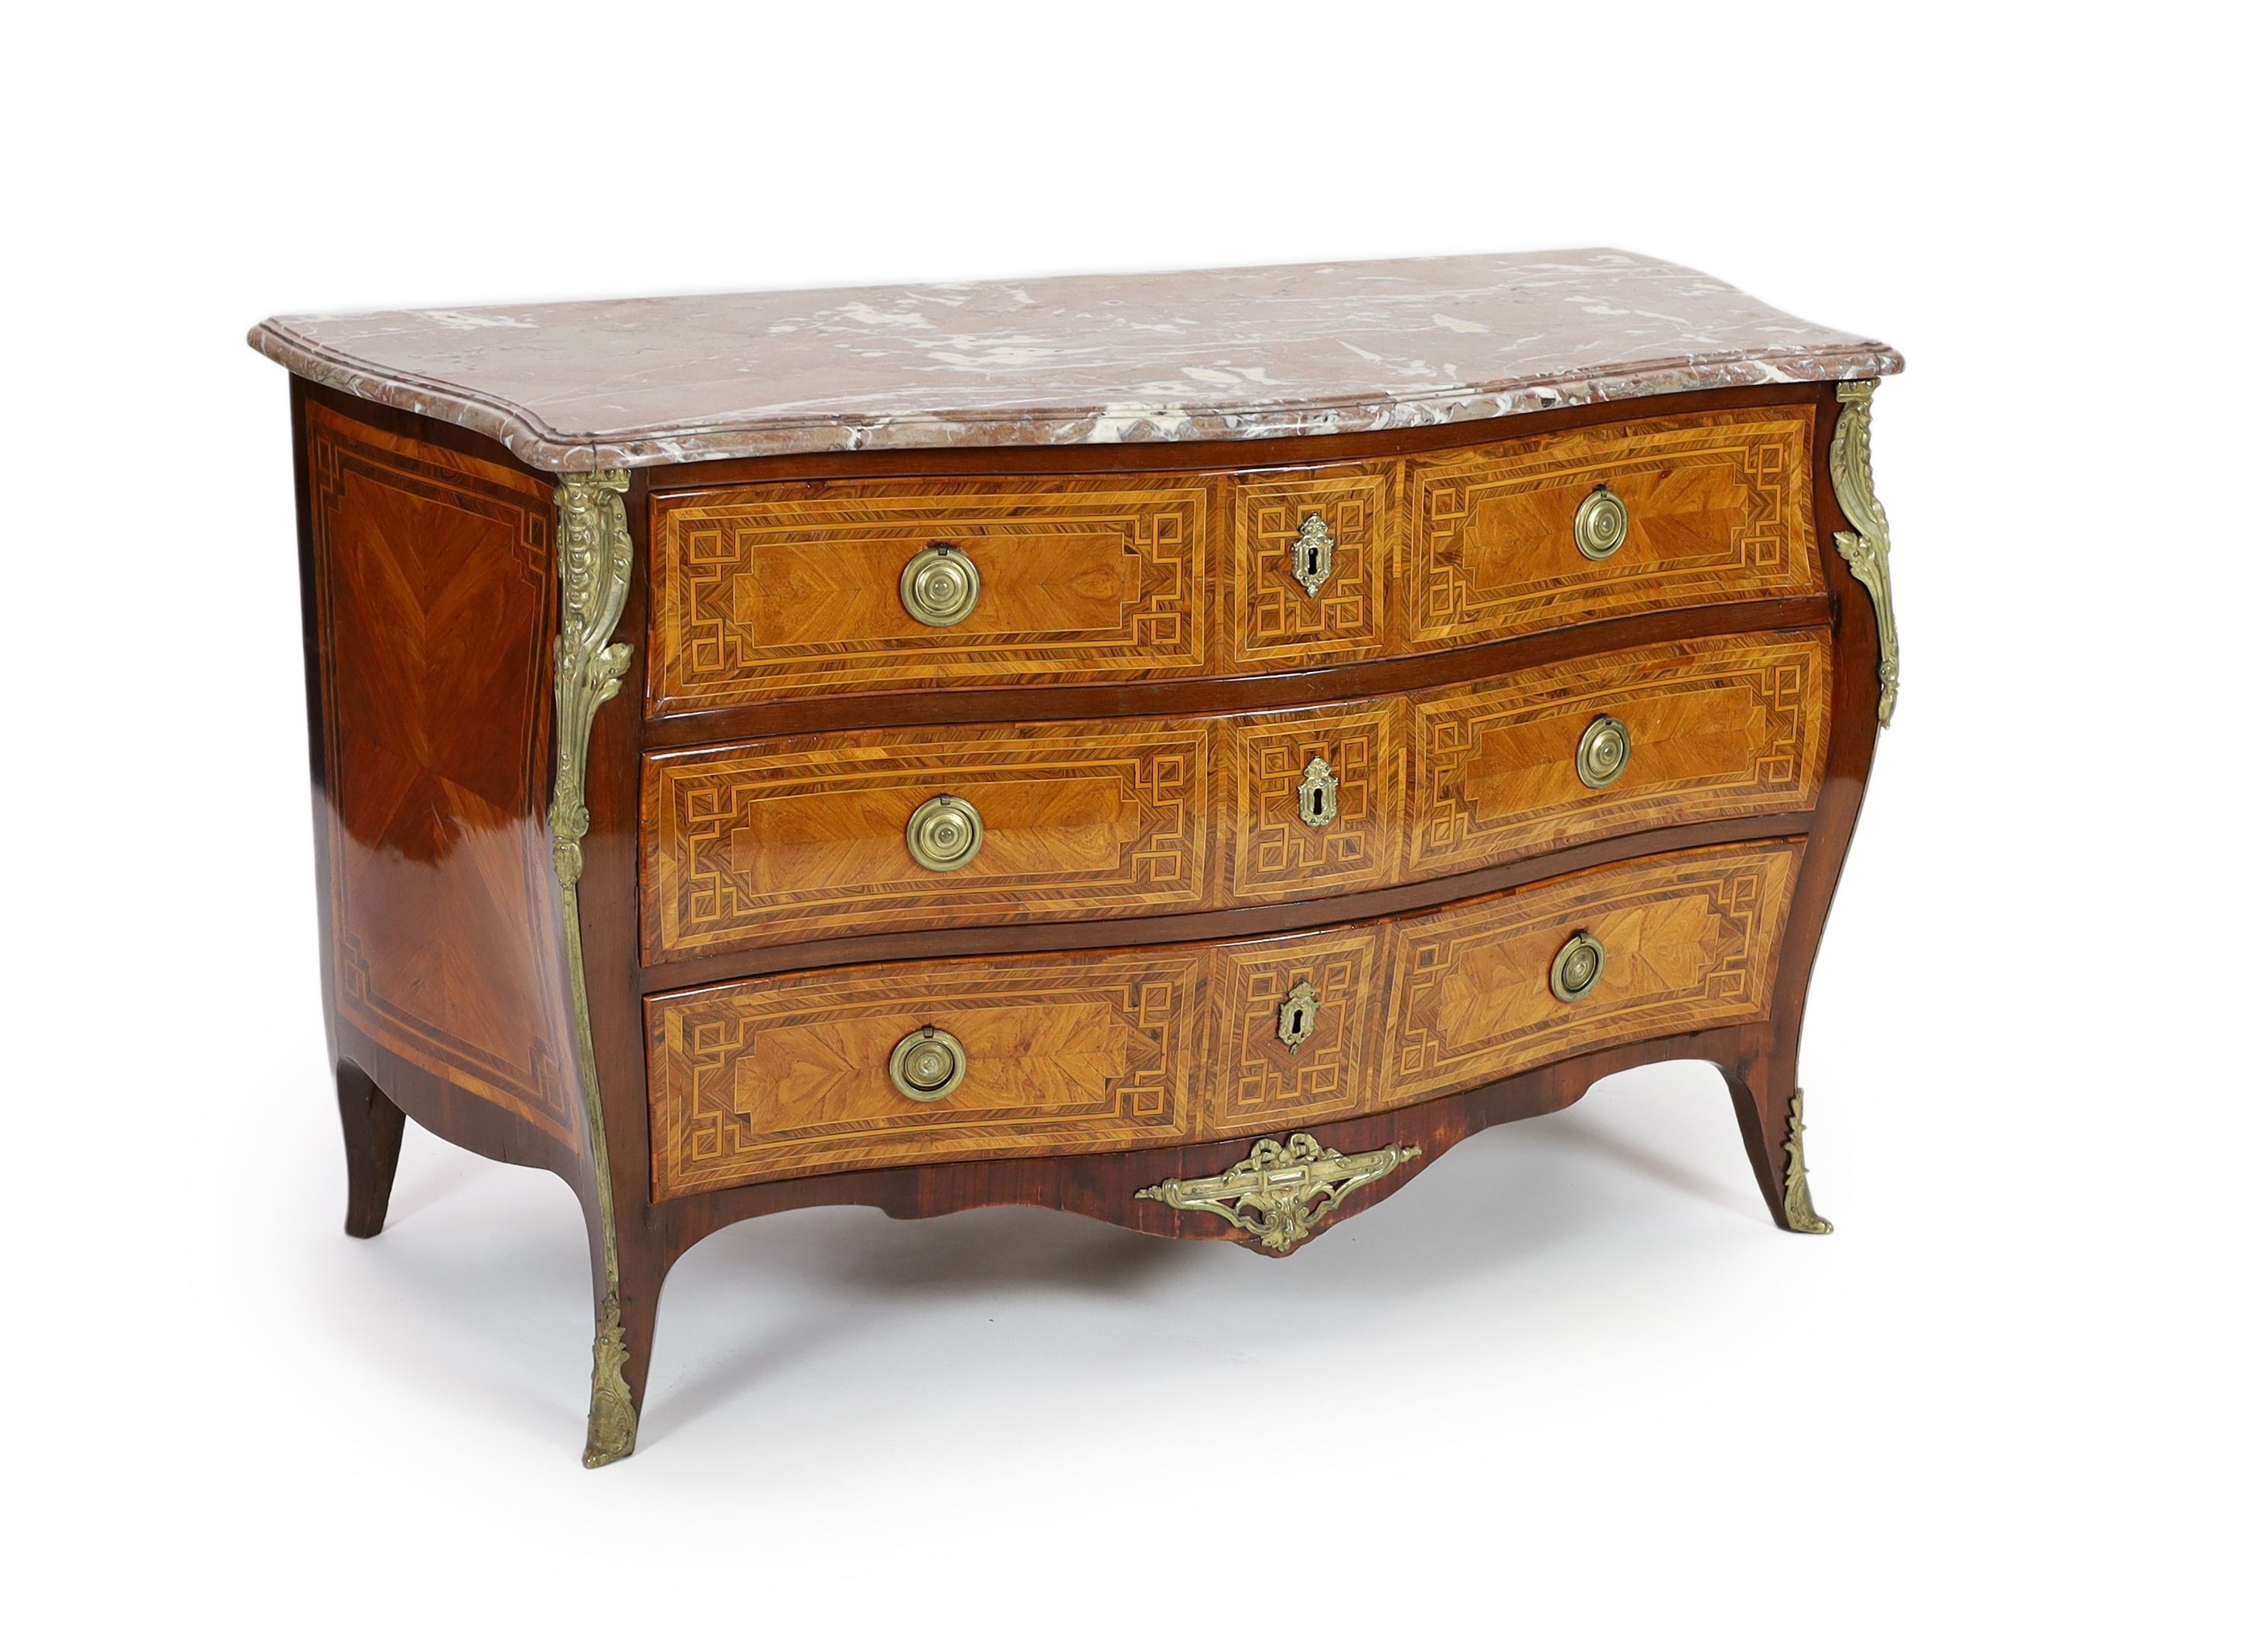 A late 18th century French banded kingwood serpentine marble top commode, with gilt metal mounts, stamped H. Wirtz to top, width 148cm, depth 69cm, height 90cm